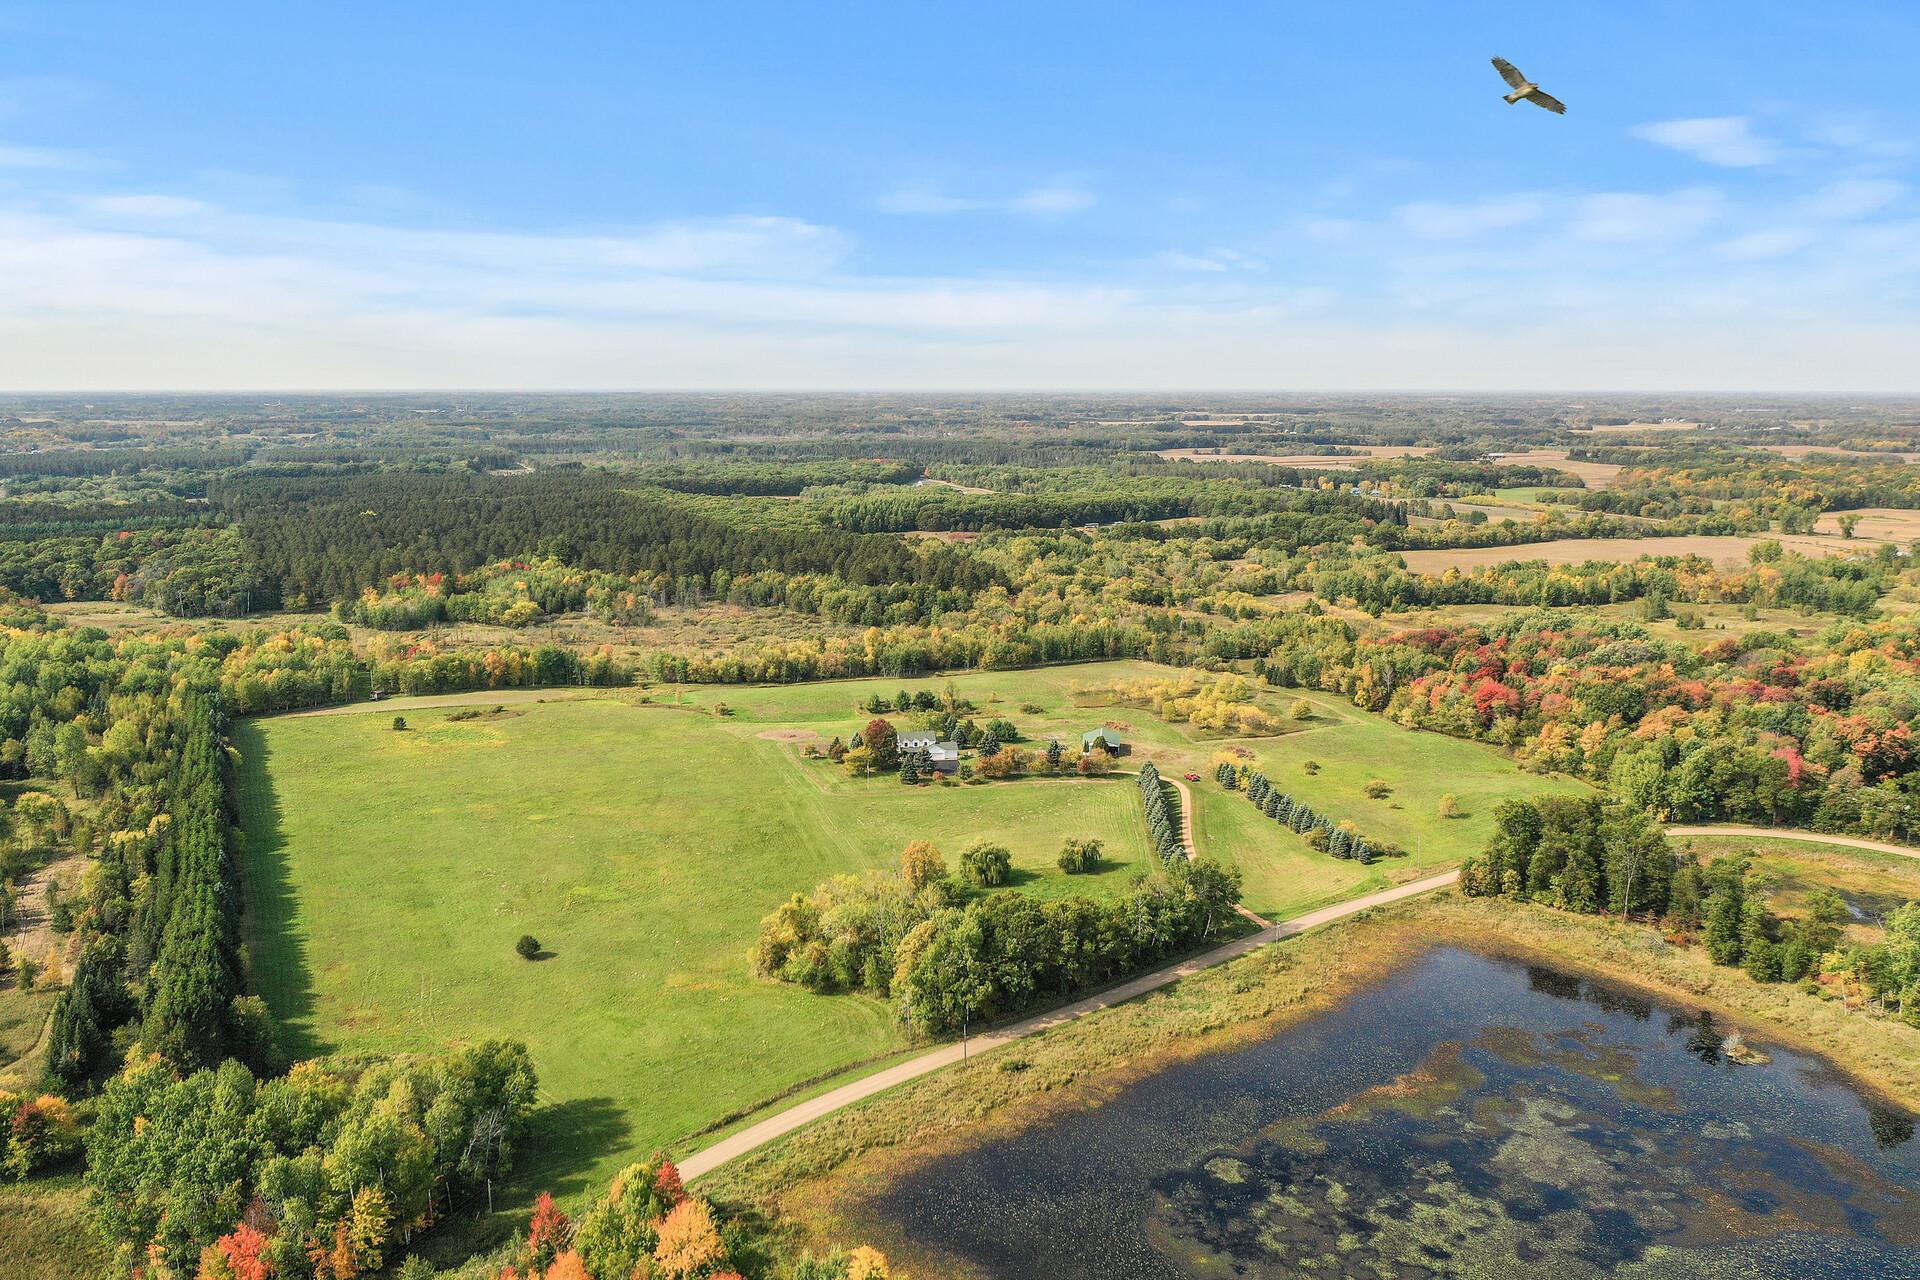 Aerial Image of all 3 lots - September 2021 - Facing west (lot 1 on right)